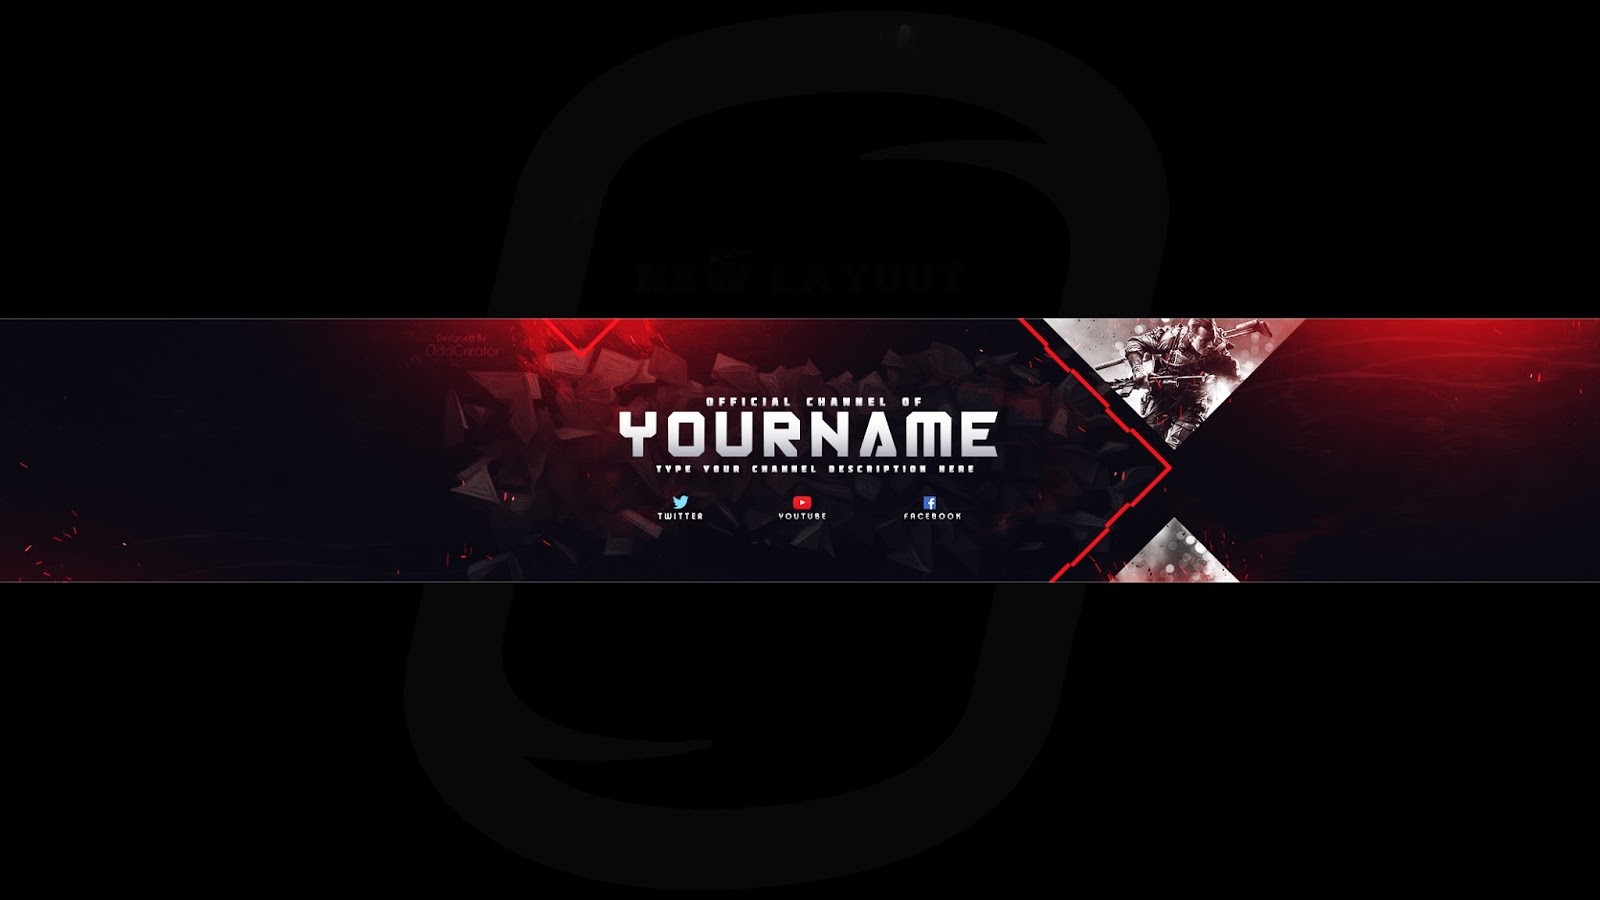 Top Gaming Banner Youtube Channel Art Photoshop Template Free Download